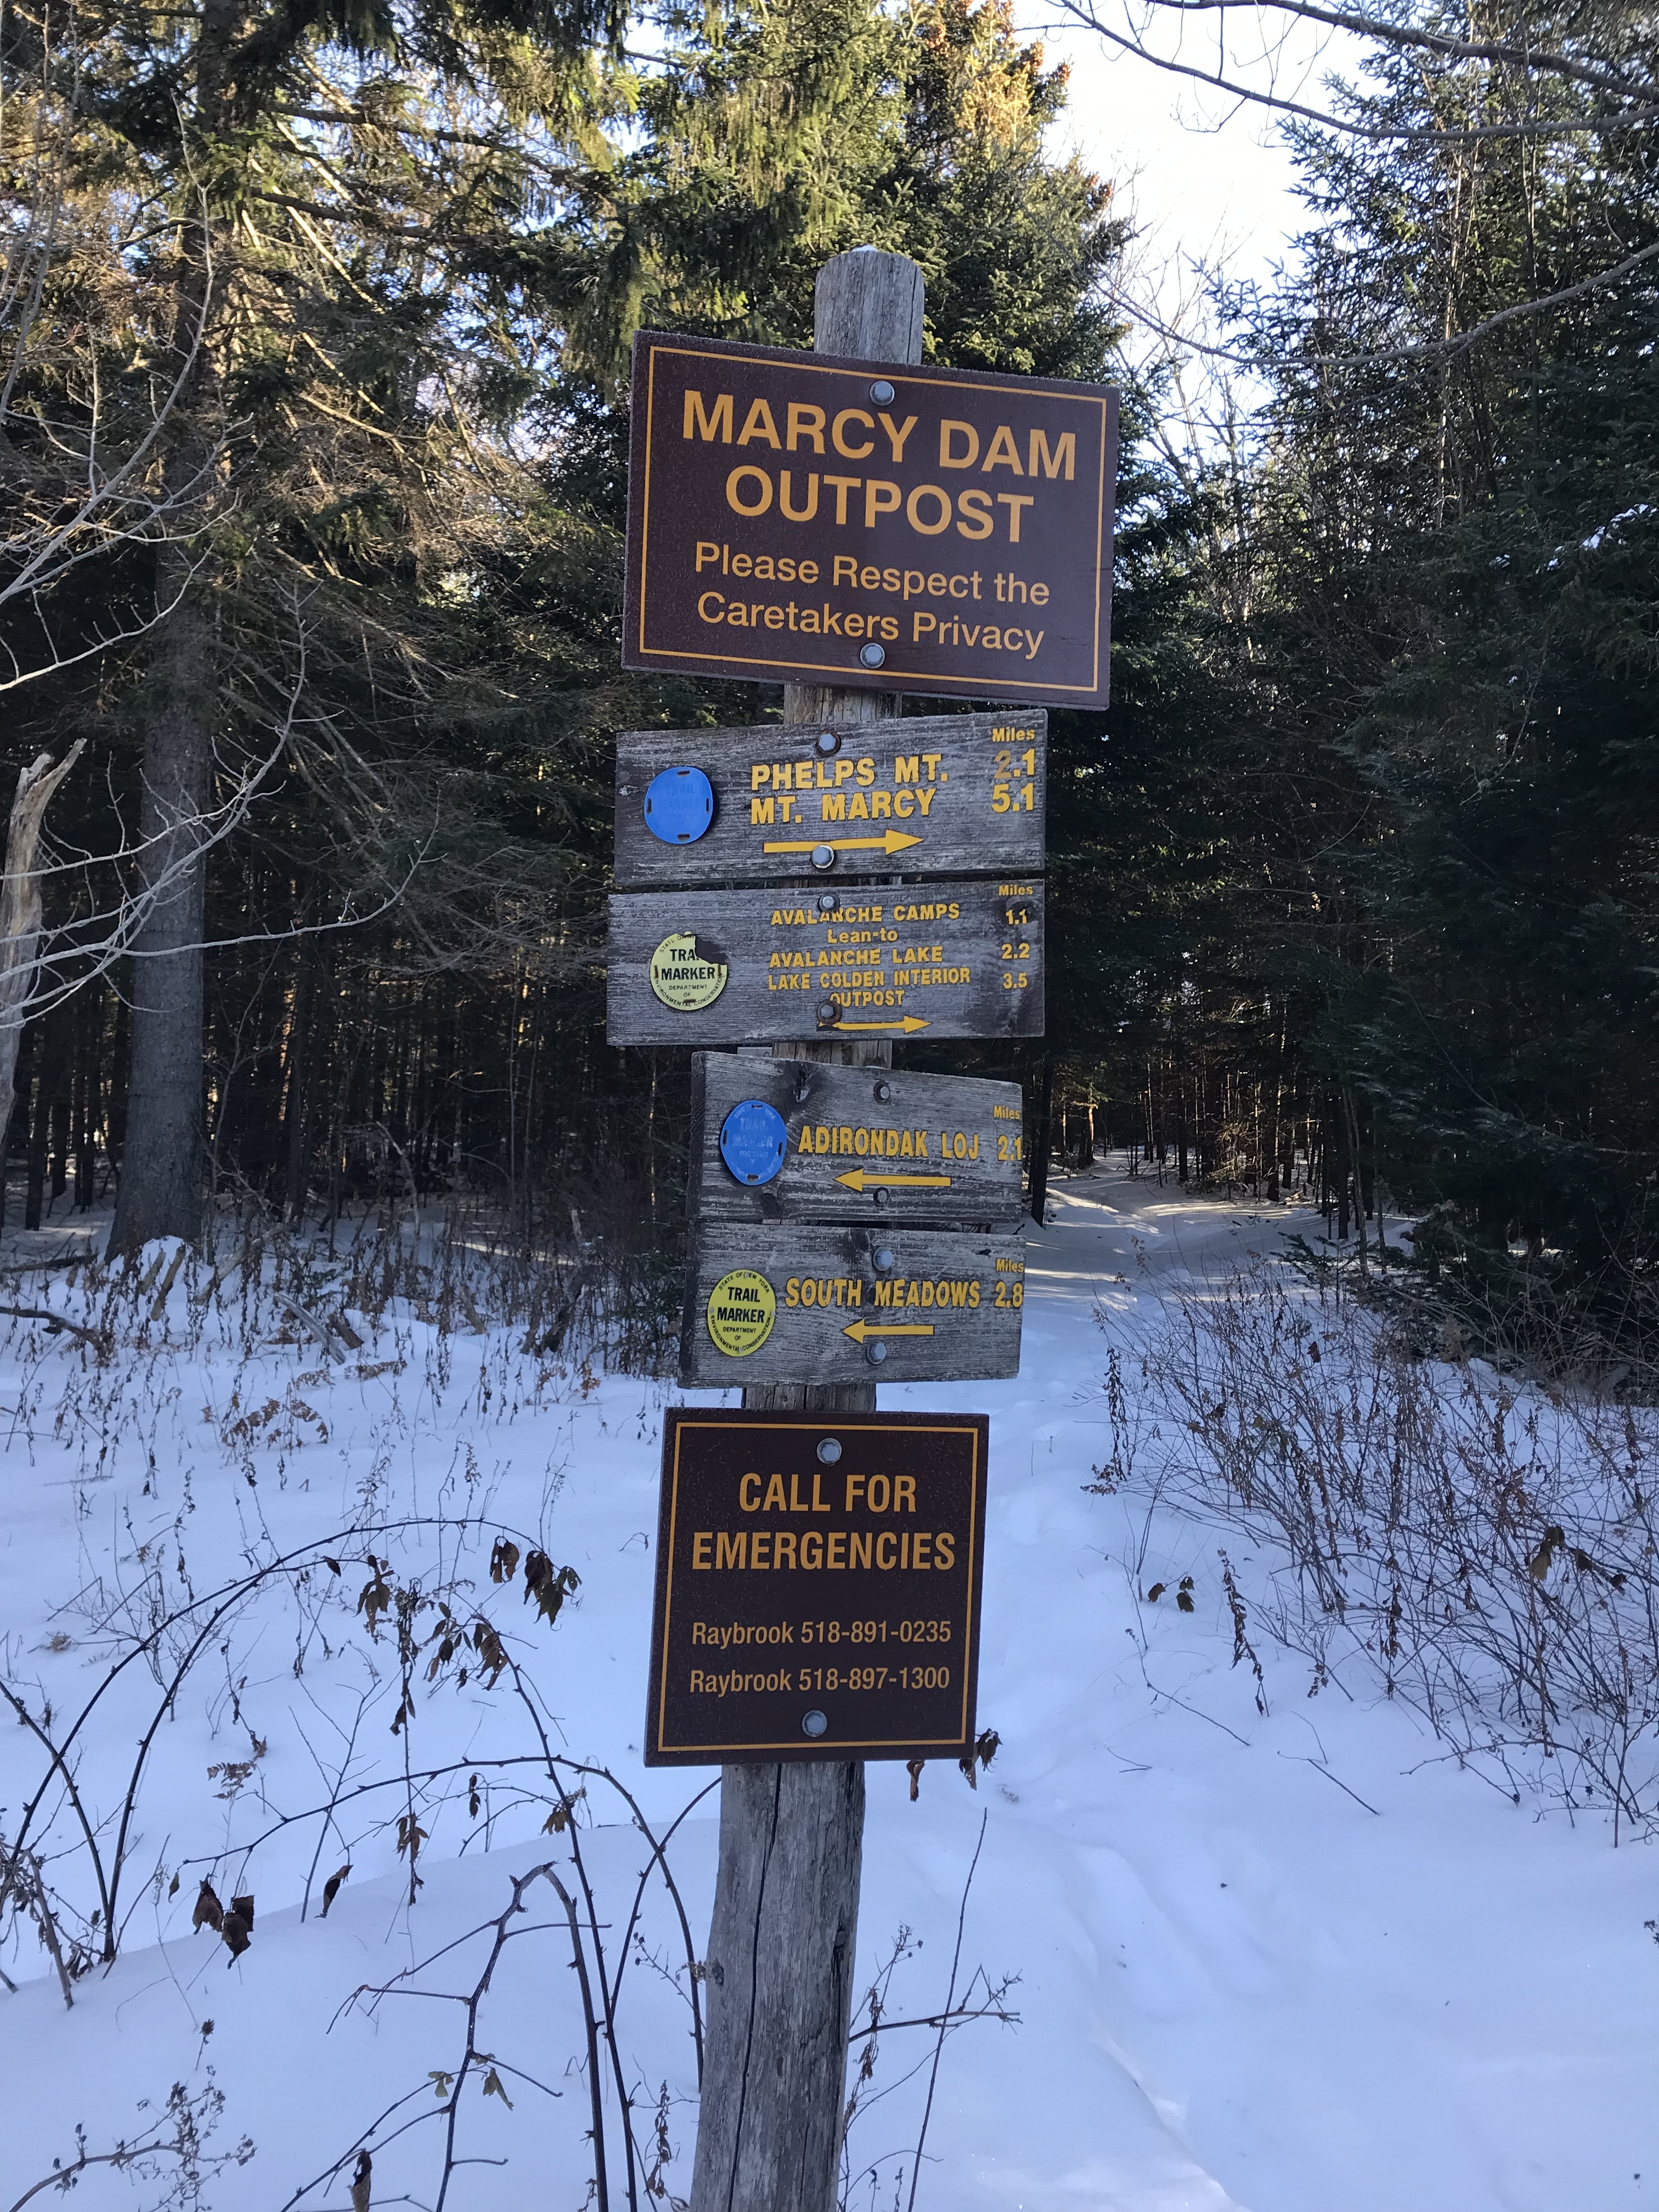 Marcy Dam Outpost